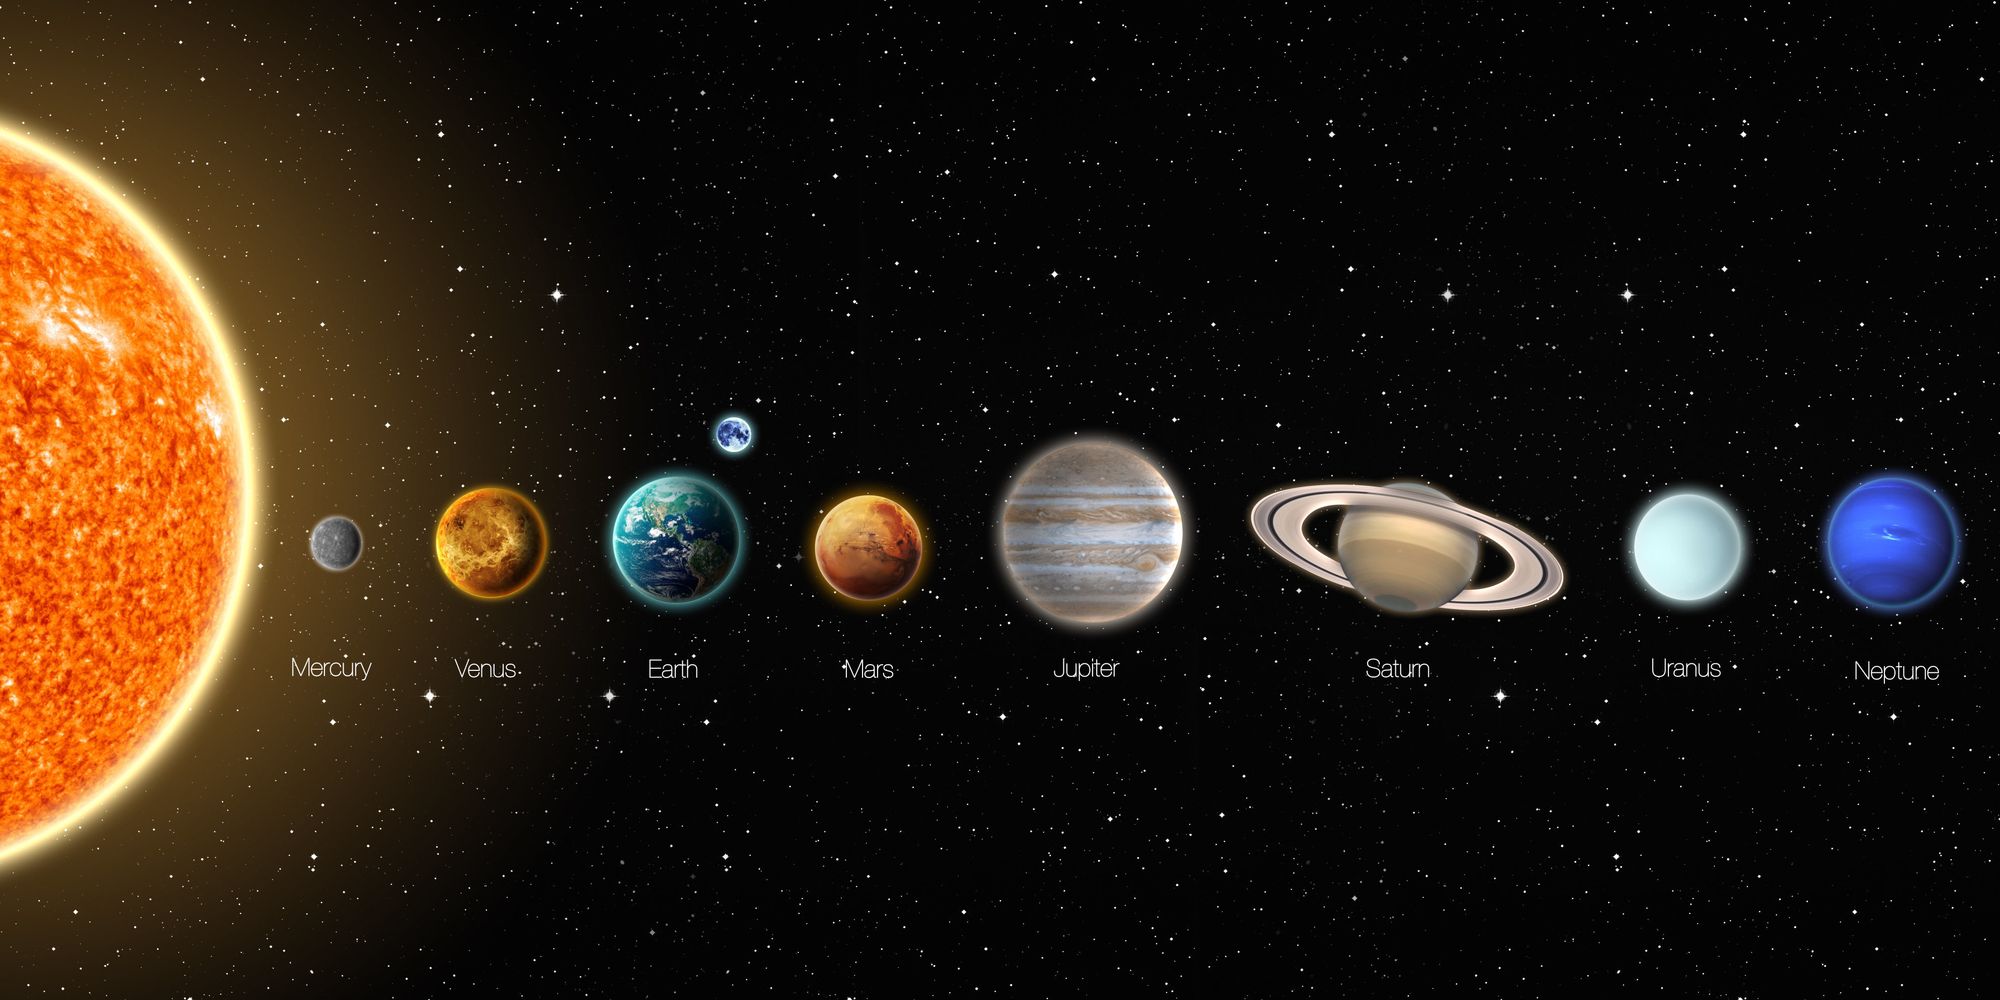 What Are Some Facts About The Planets In Our Solar System